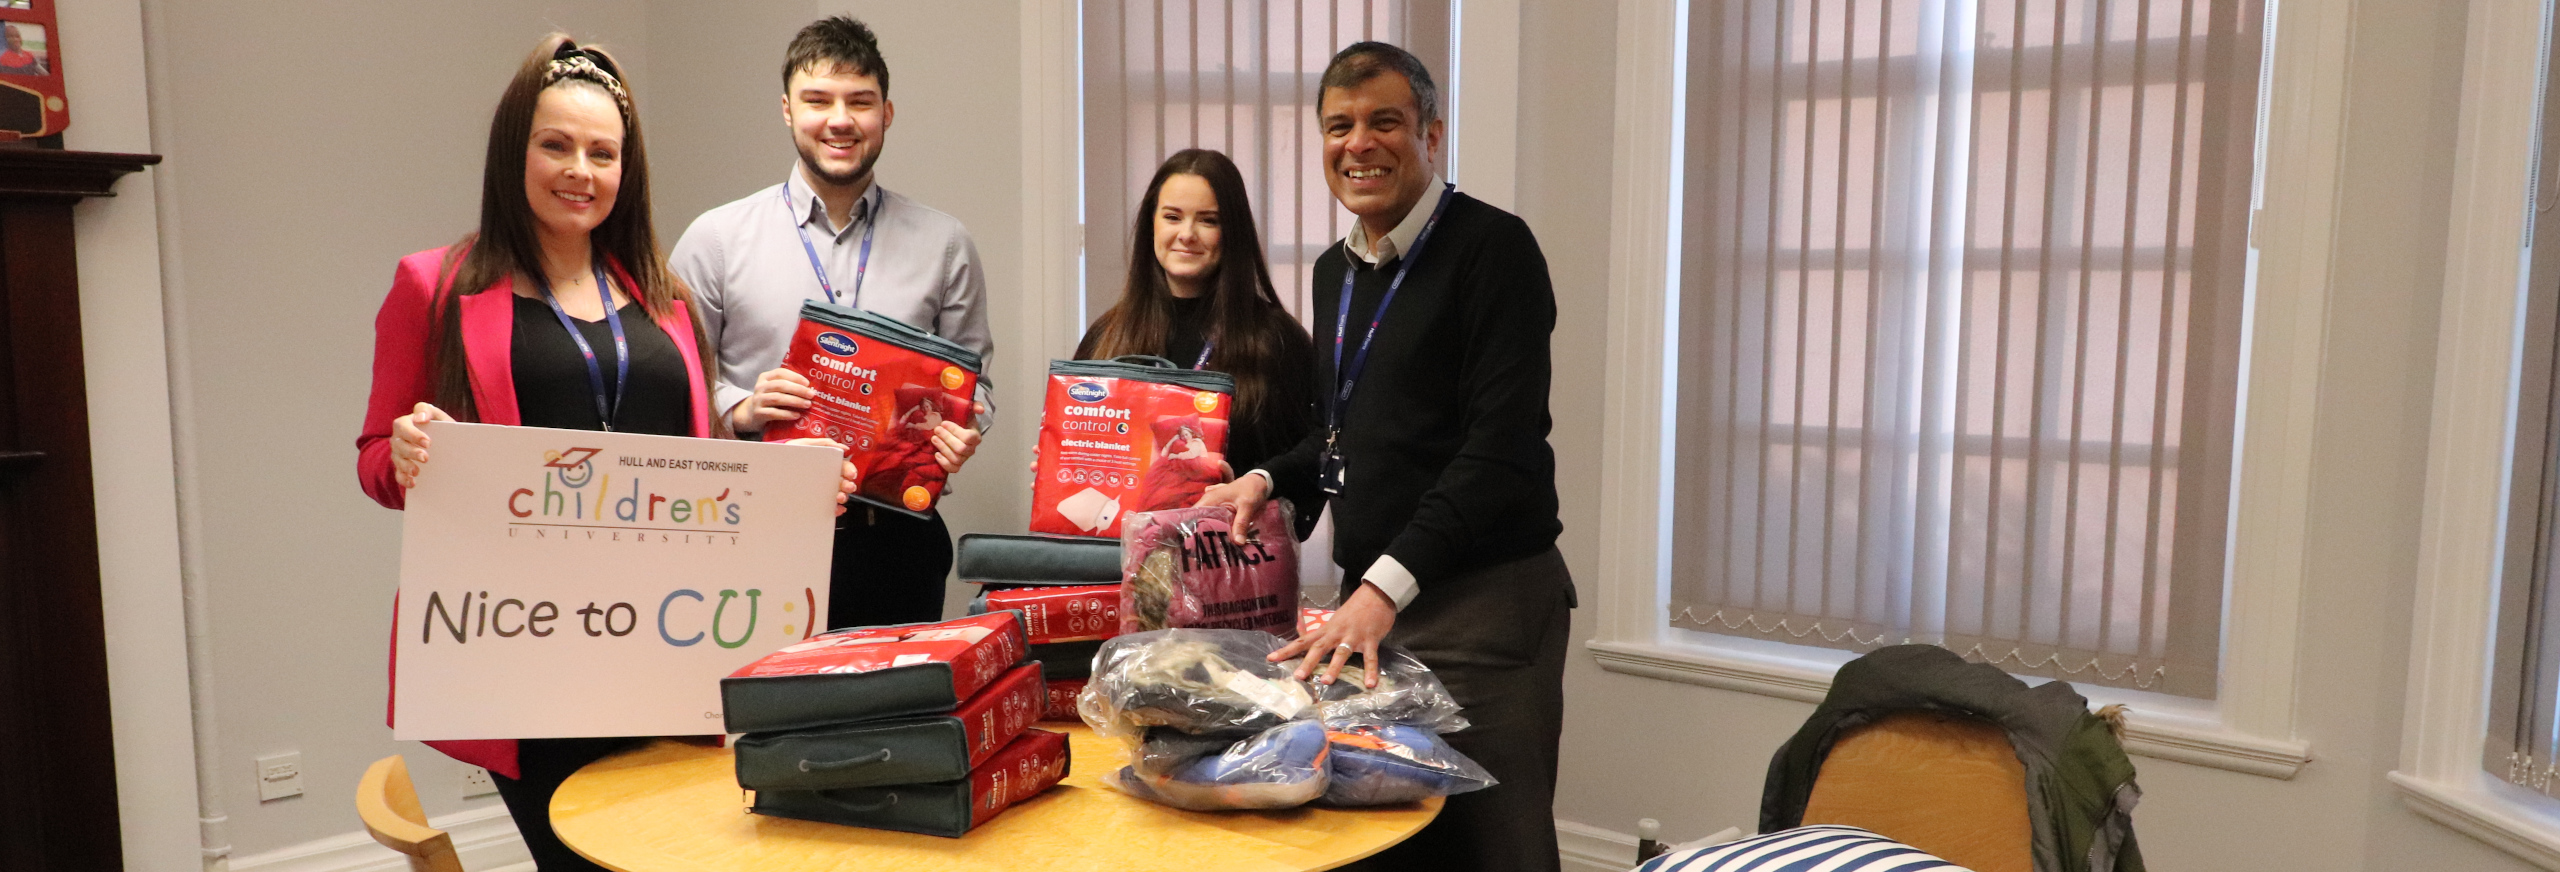 Hull Trains partners with Hull Childrens University to deliver warm packs